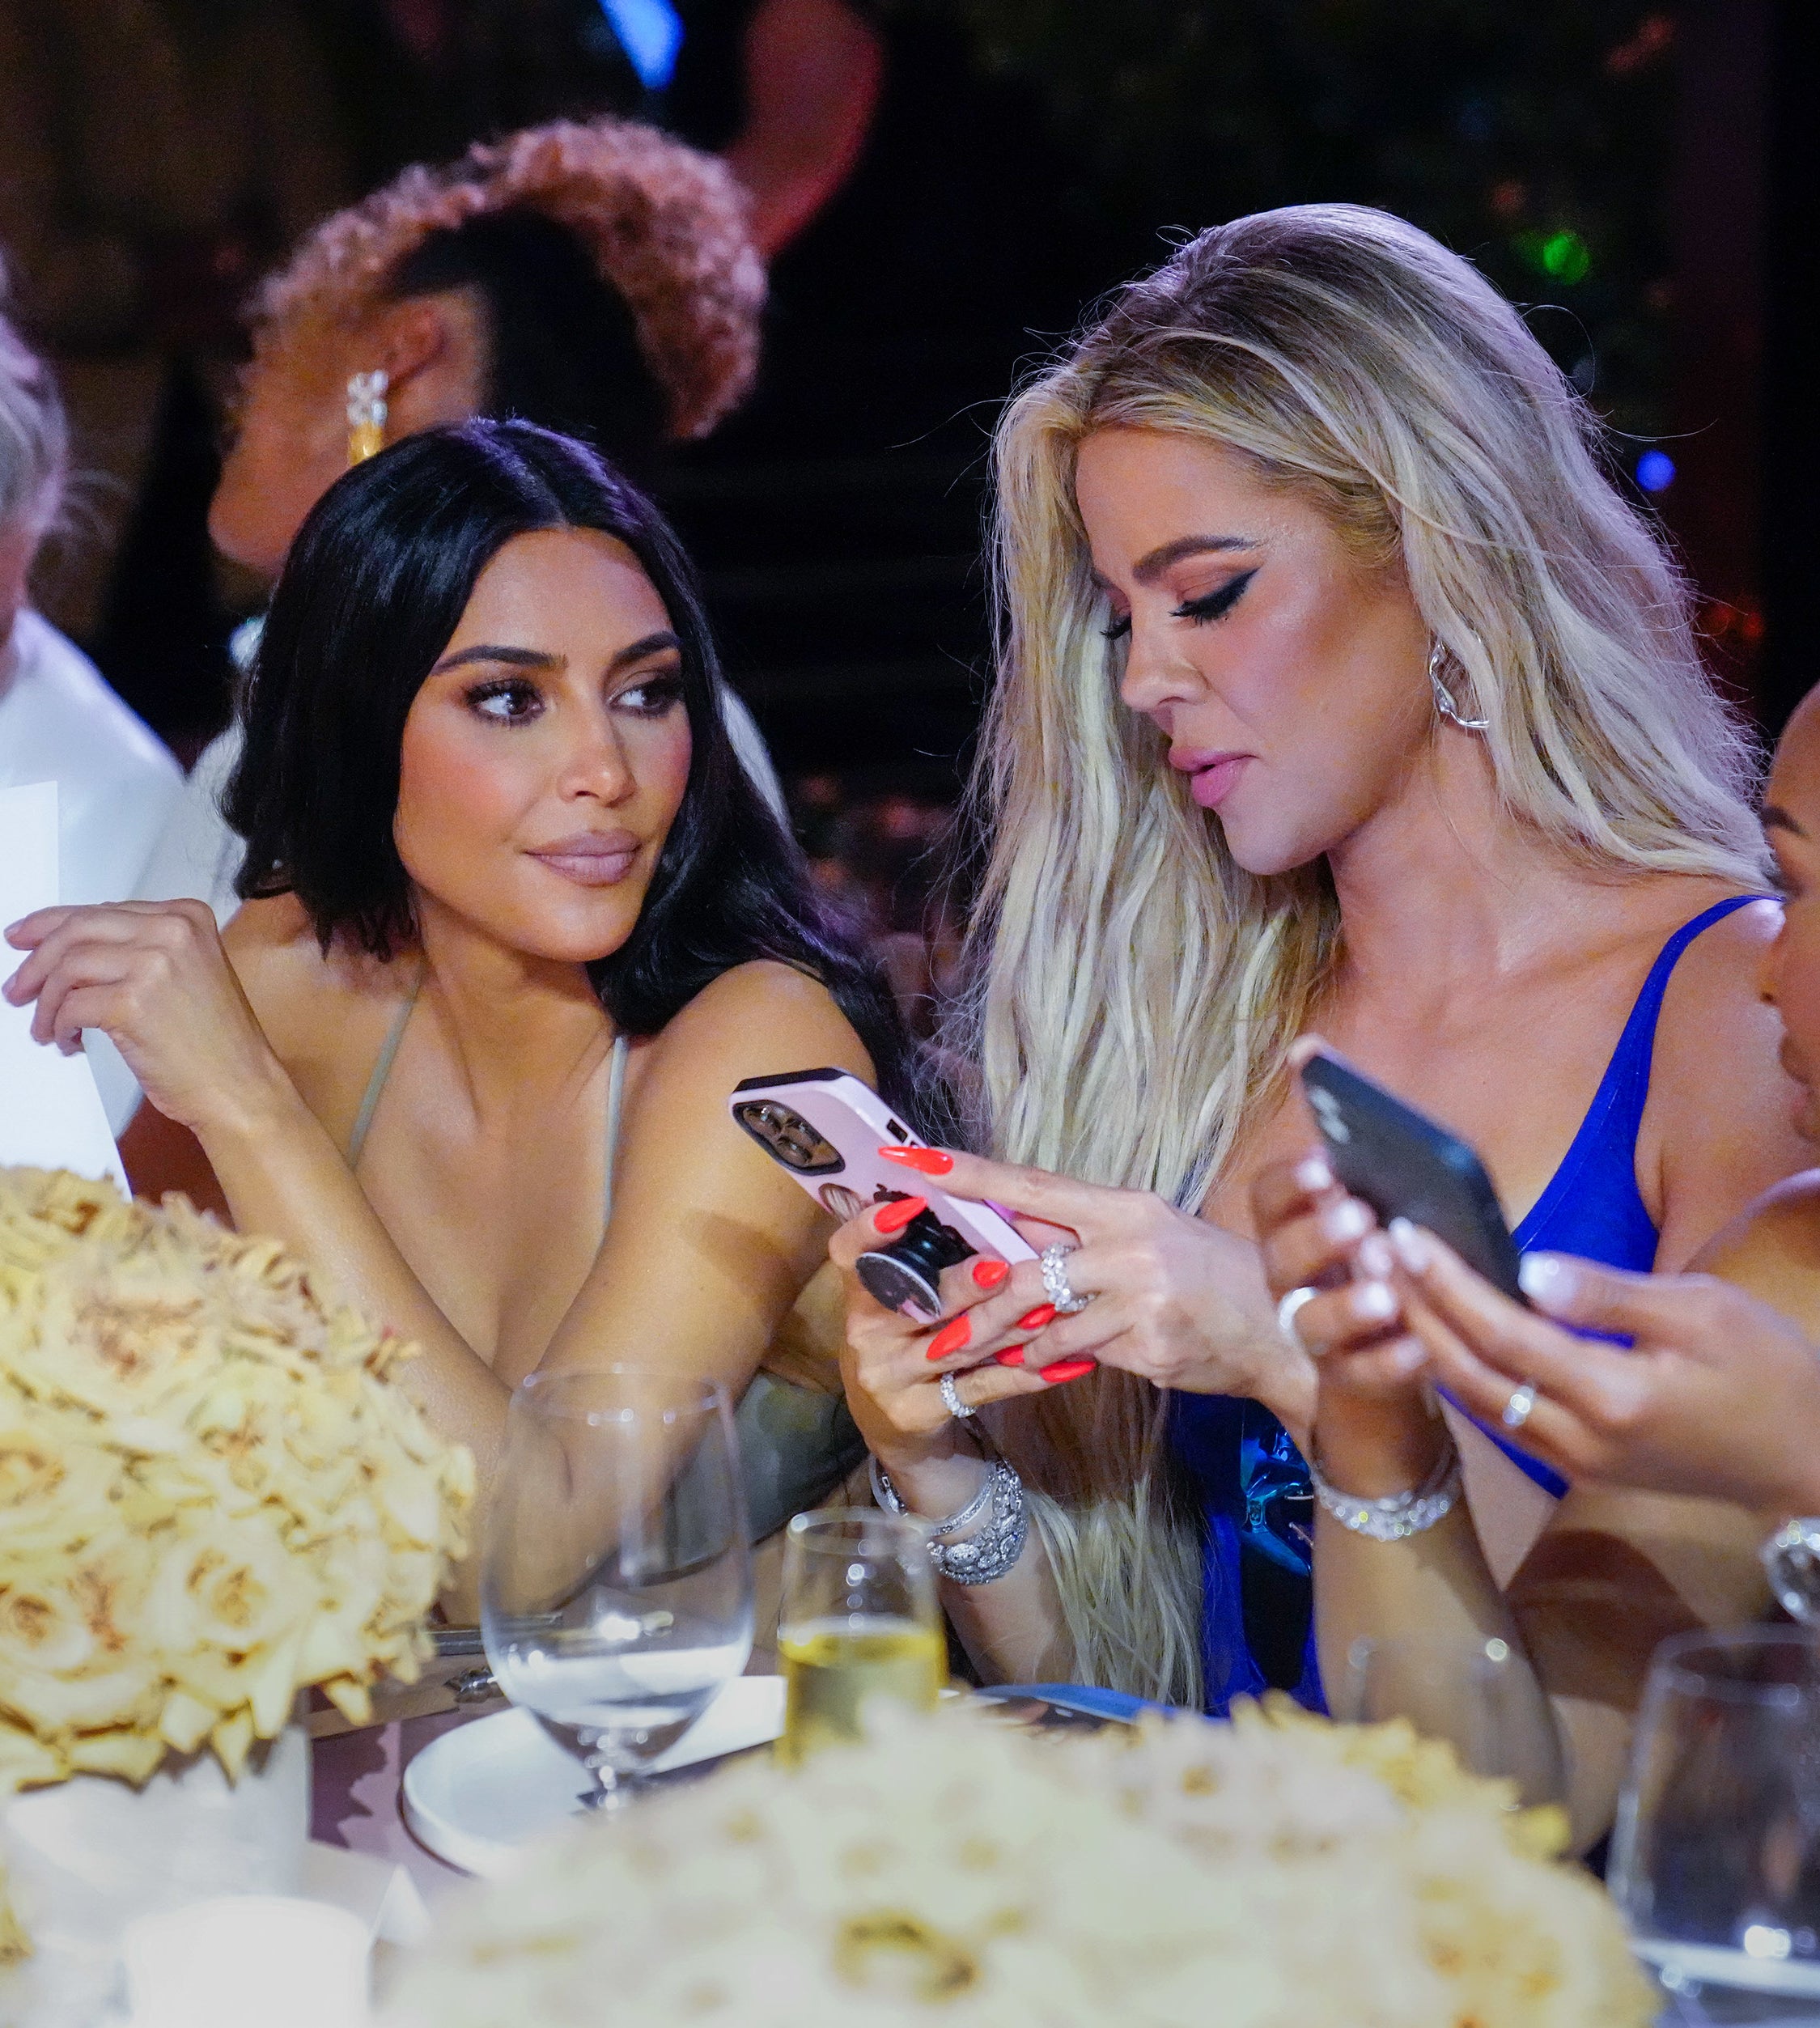 Kim and Khloé sitting at a table